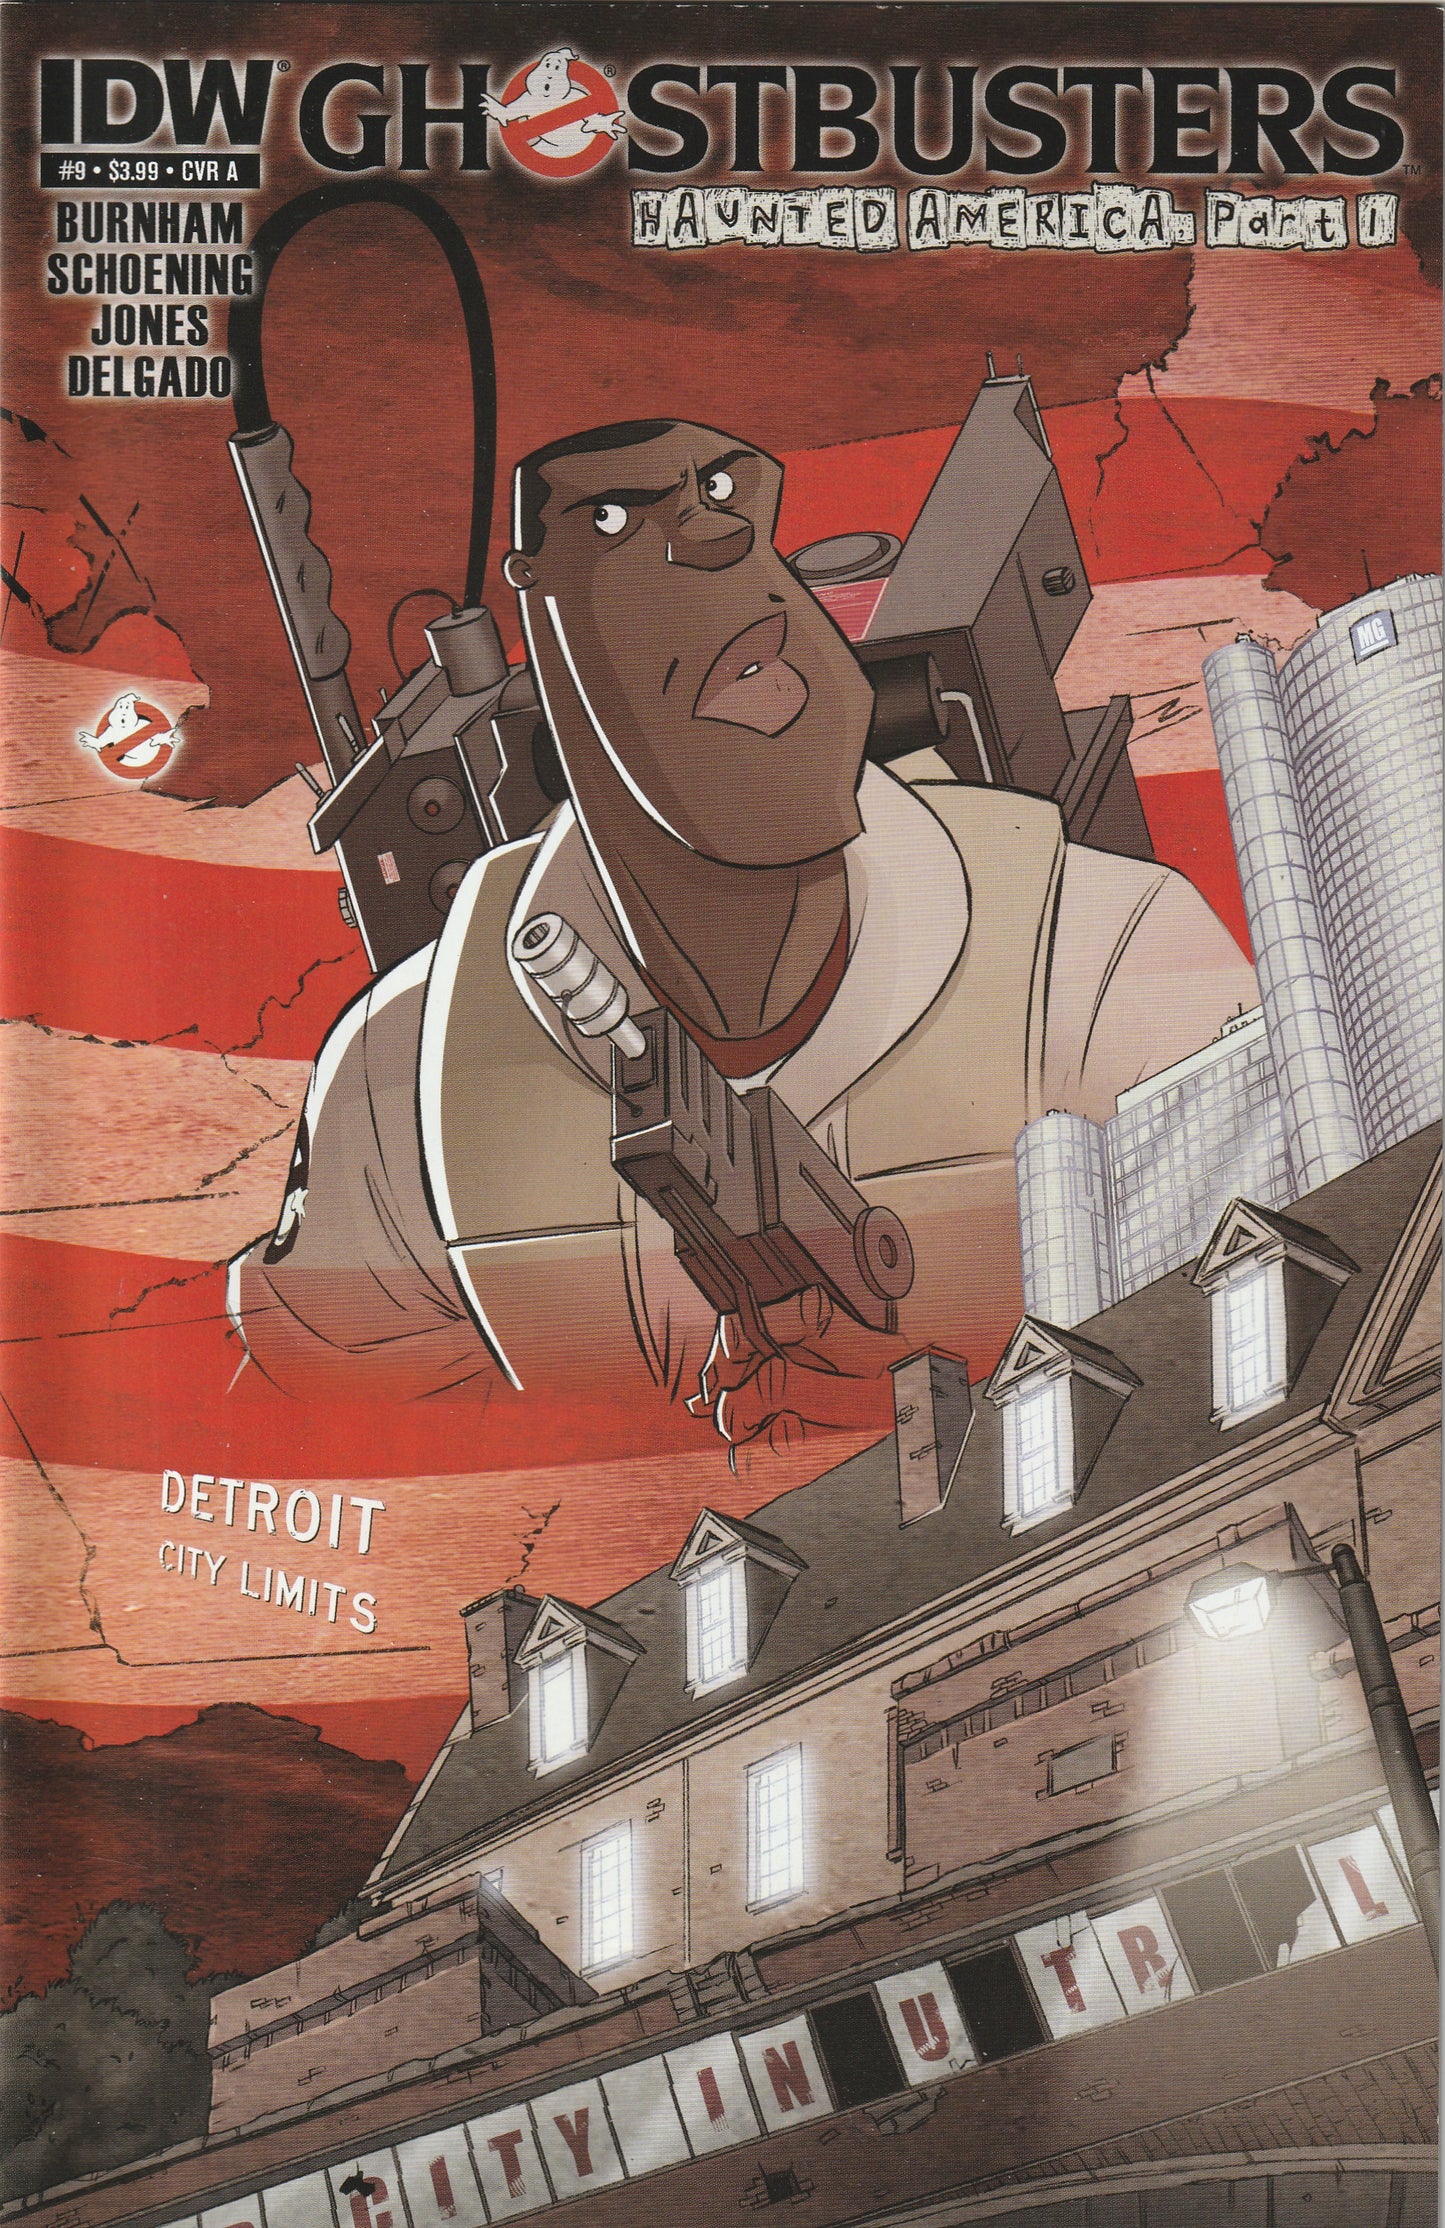 Ghostbusters #9 (2012) - Cover A Dan Schoening Cover